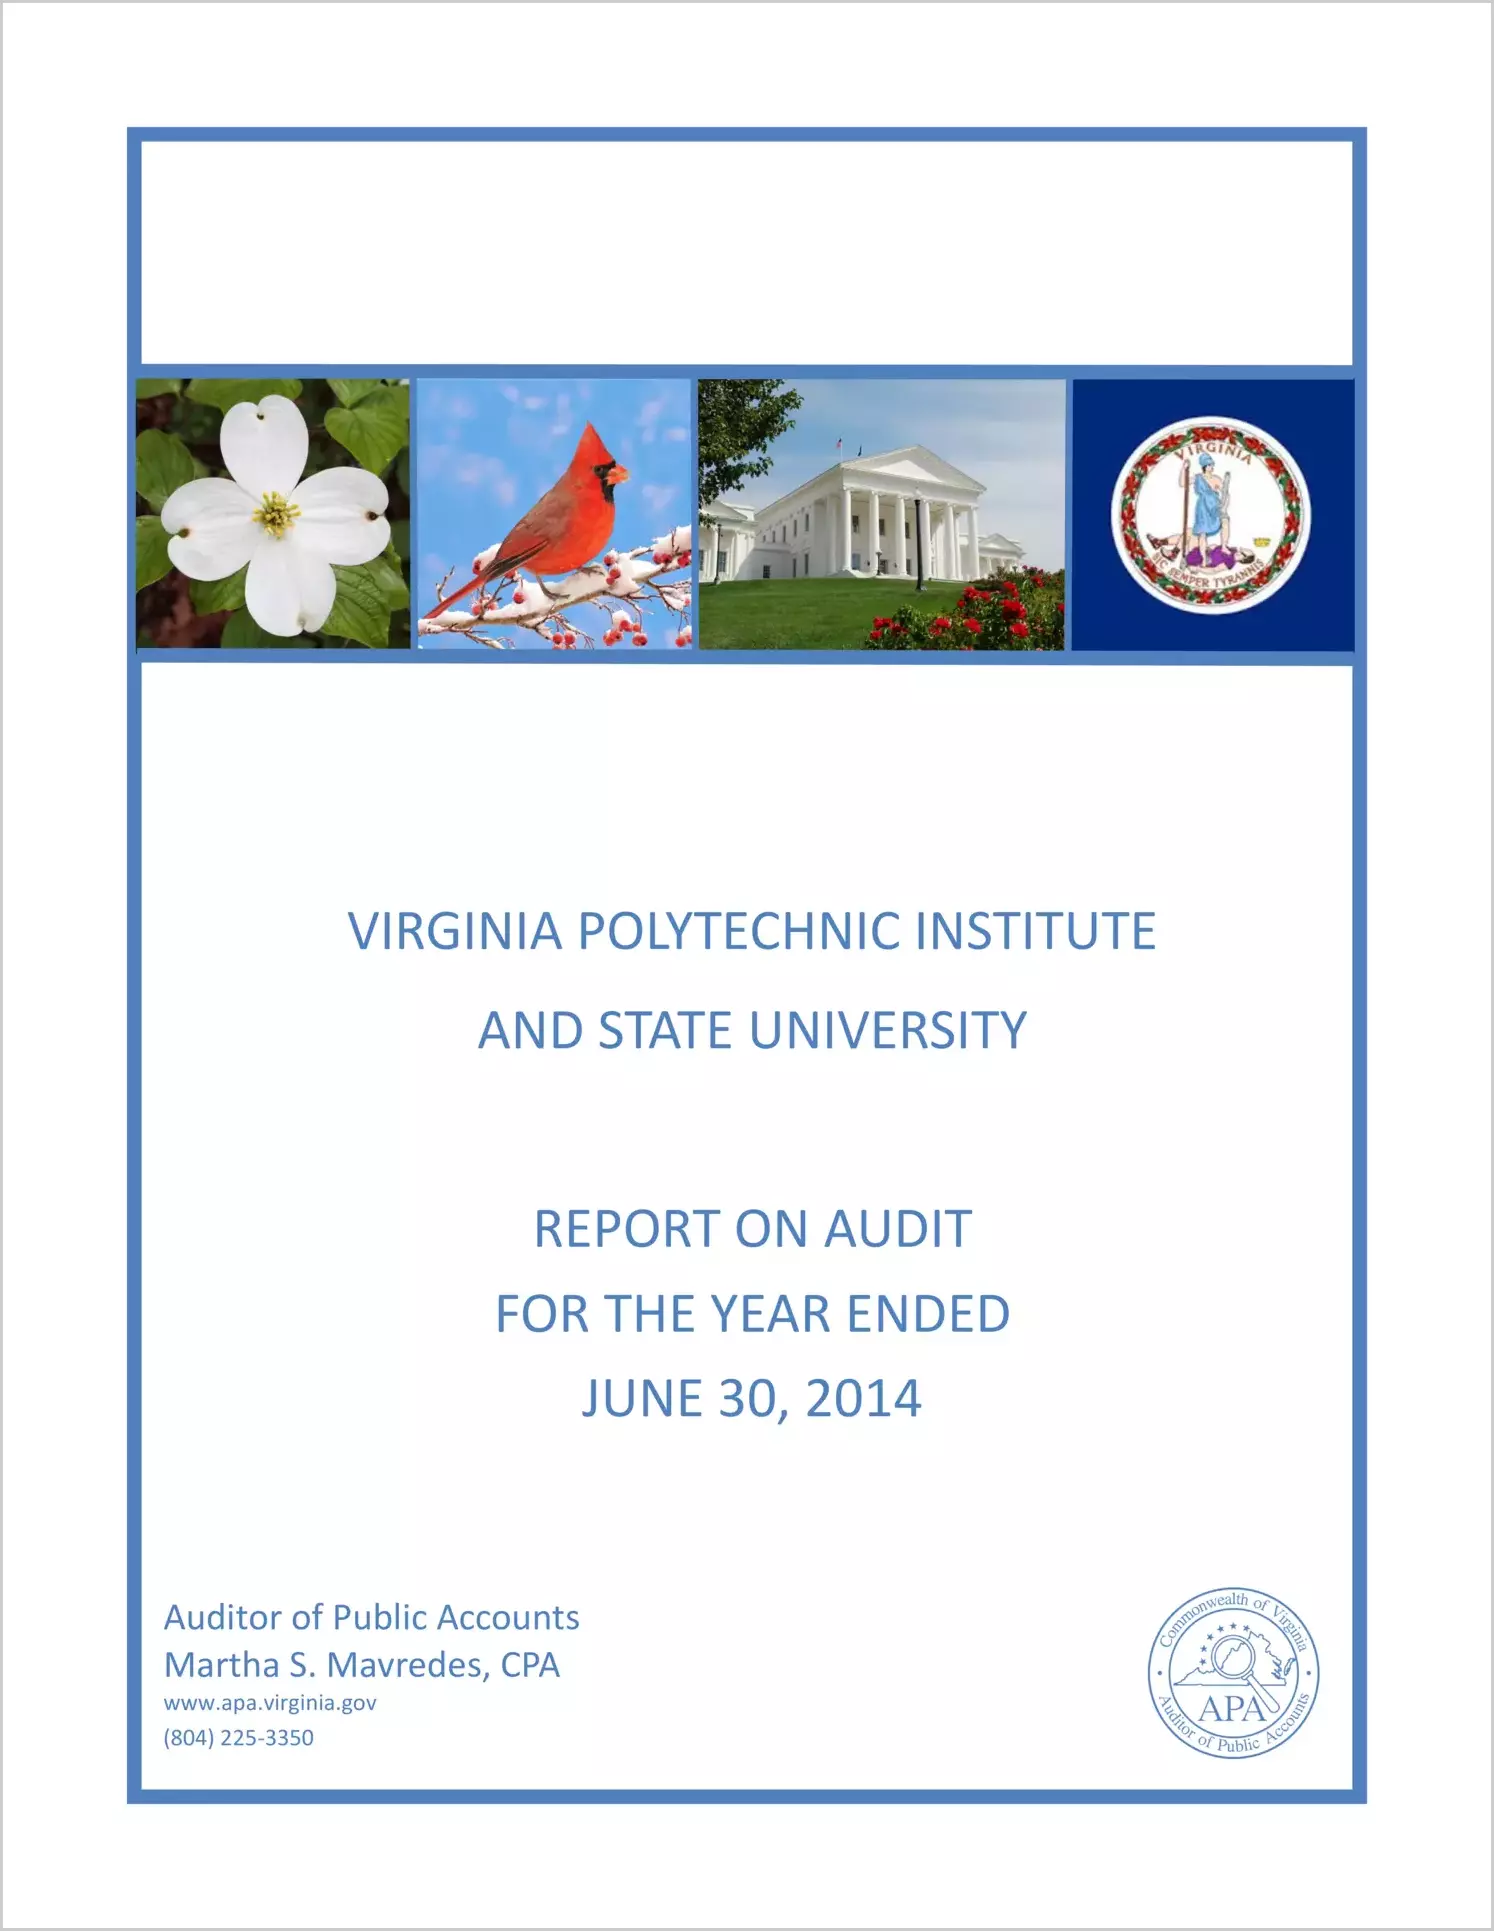 Virginia Polytechnic Institute and State University for the year ended June 30, 2014